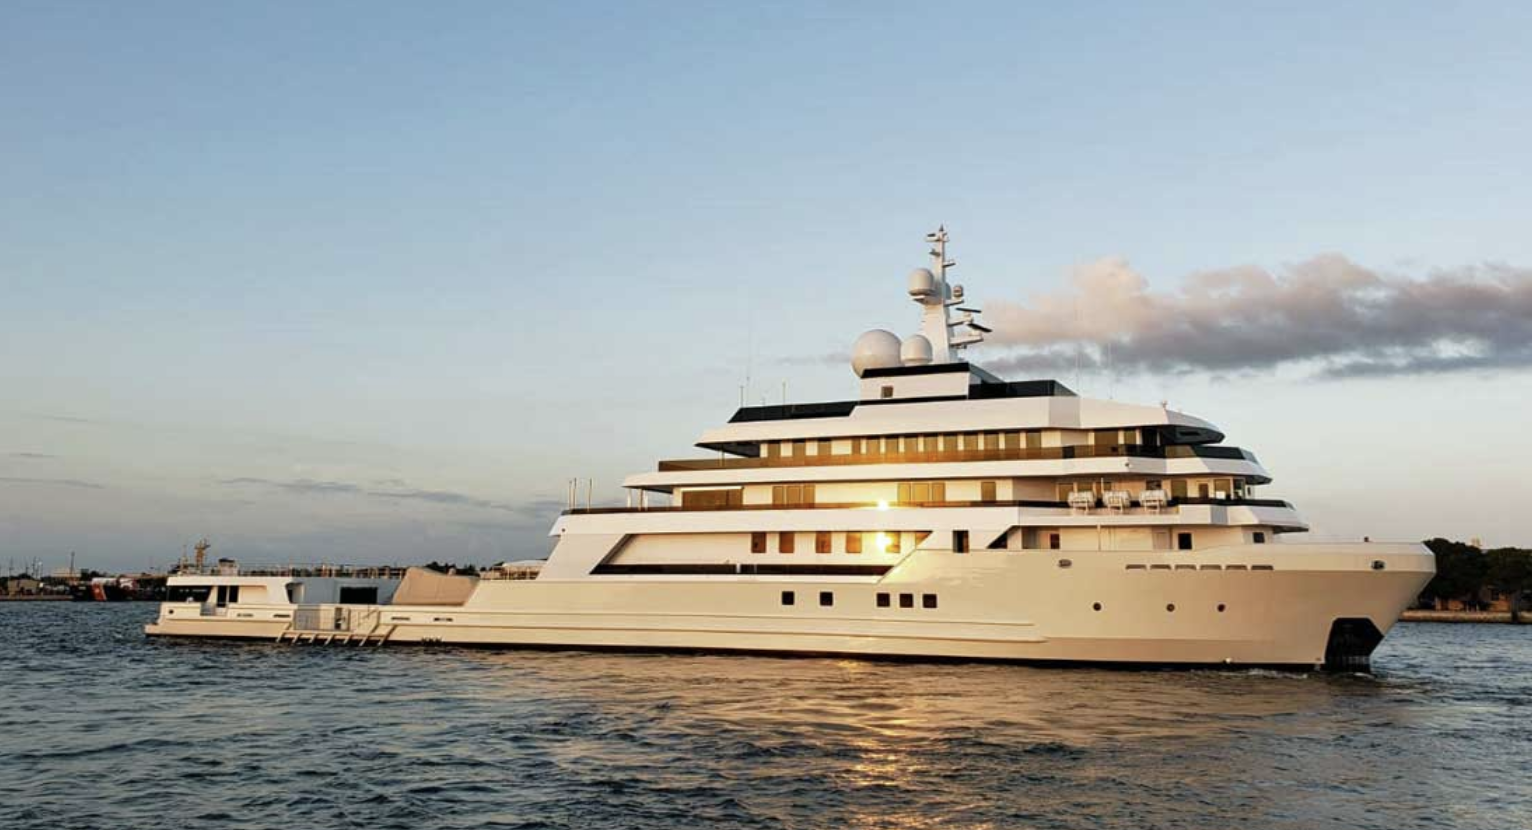 work on the super yachts